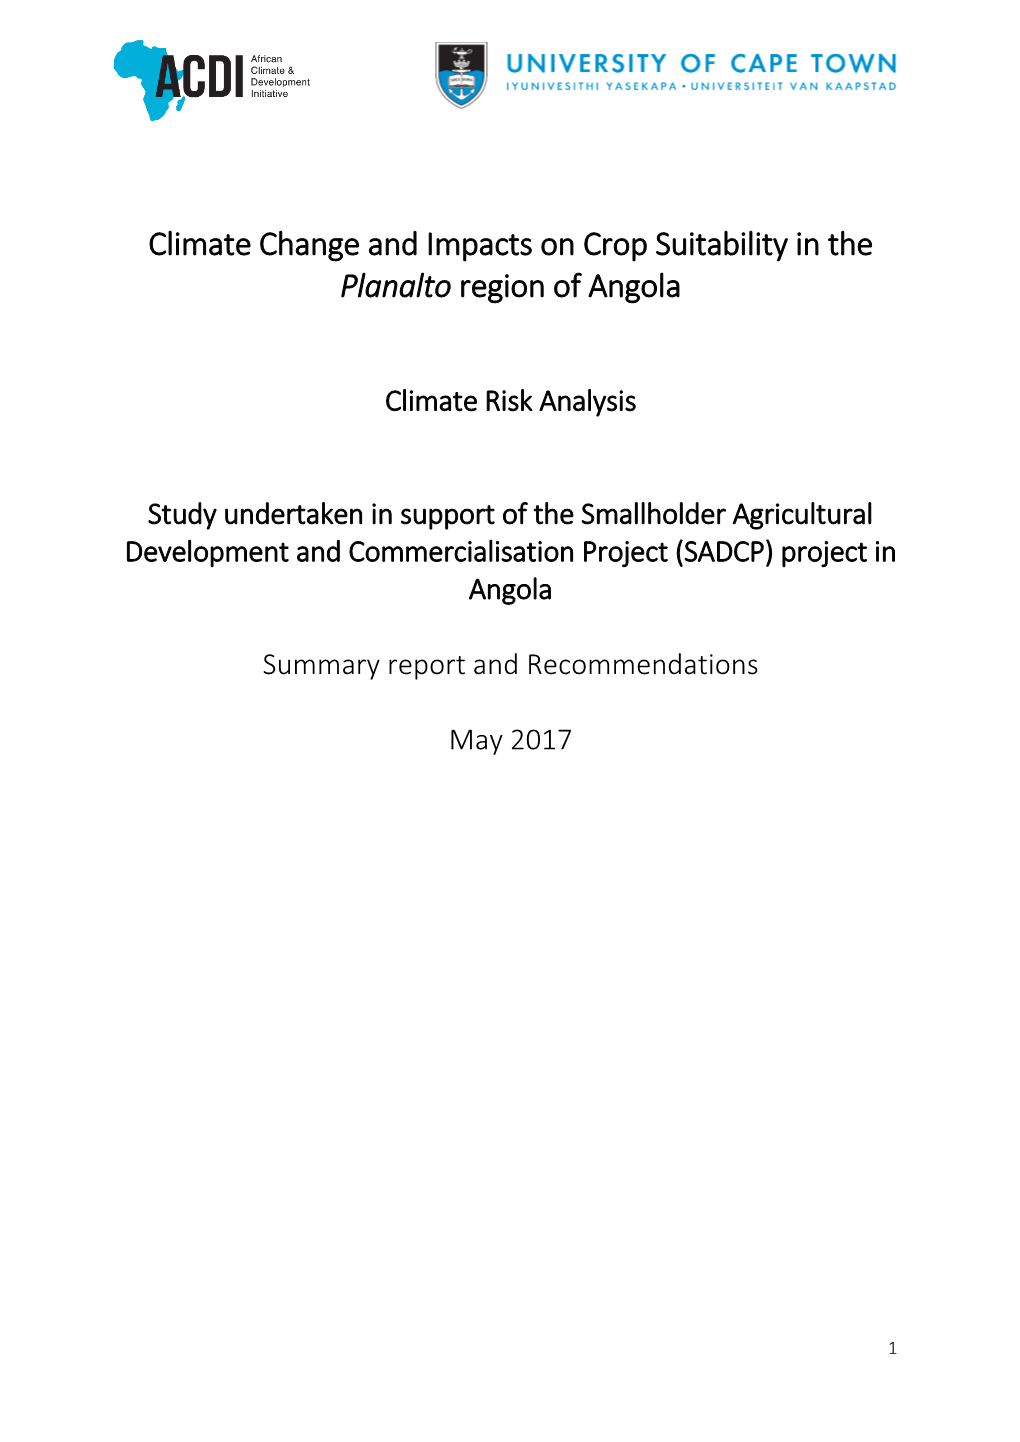 Climate Change and Impacts on Crop Suitability in the Planalto Region of Angola